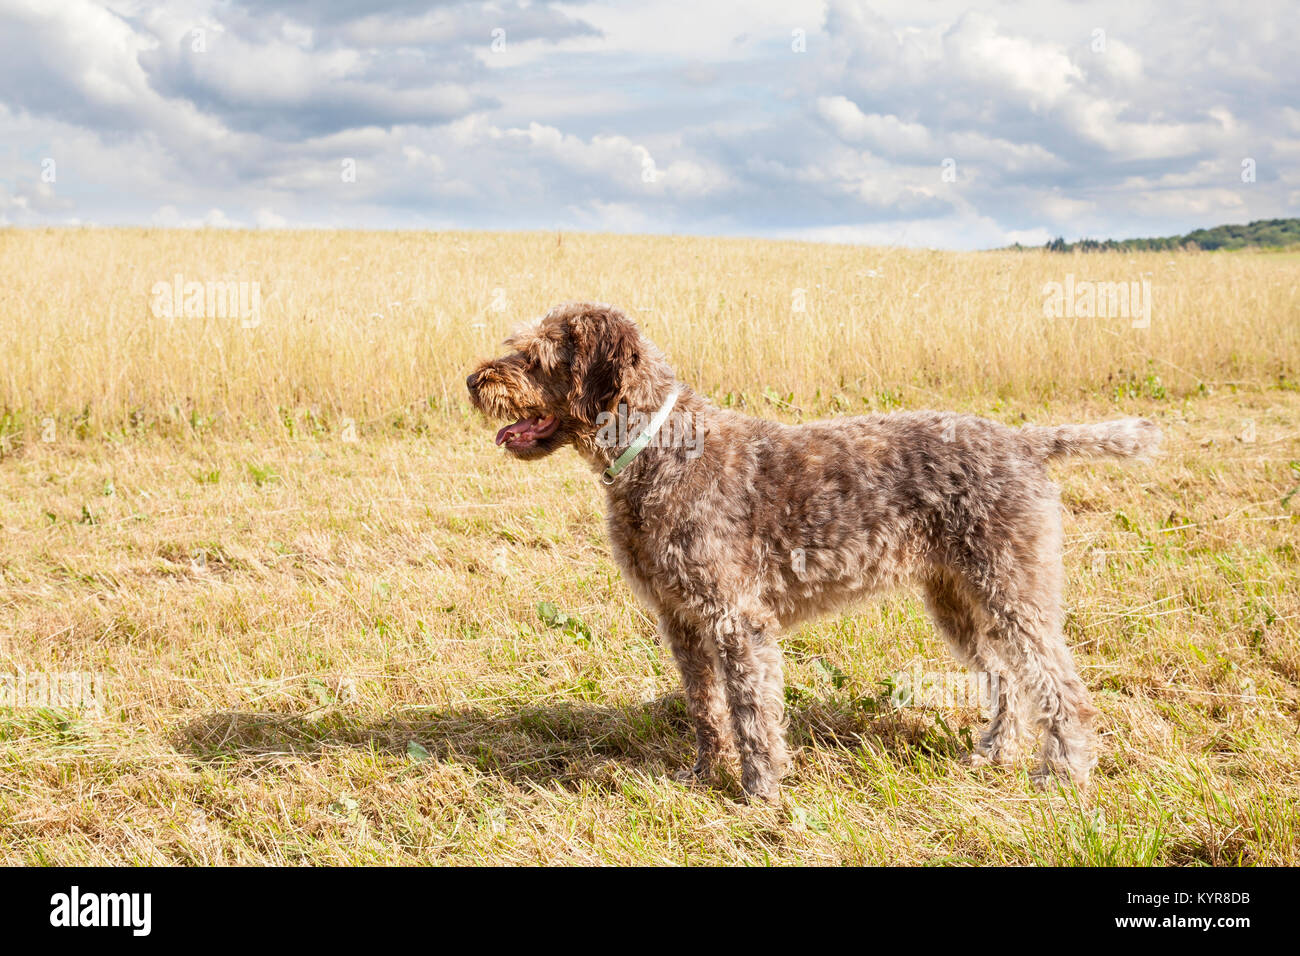 Profile view of a Wirehaired Pointing Griffon, or Korthals,  standing in a partially mown agricultural field during hay harvesting, Bred as a gundog f Stock Photo